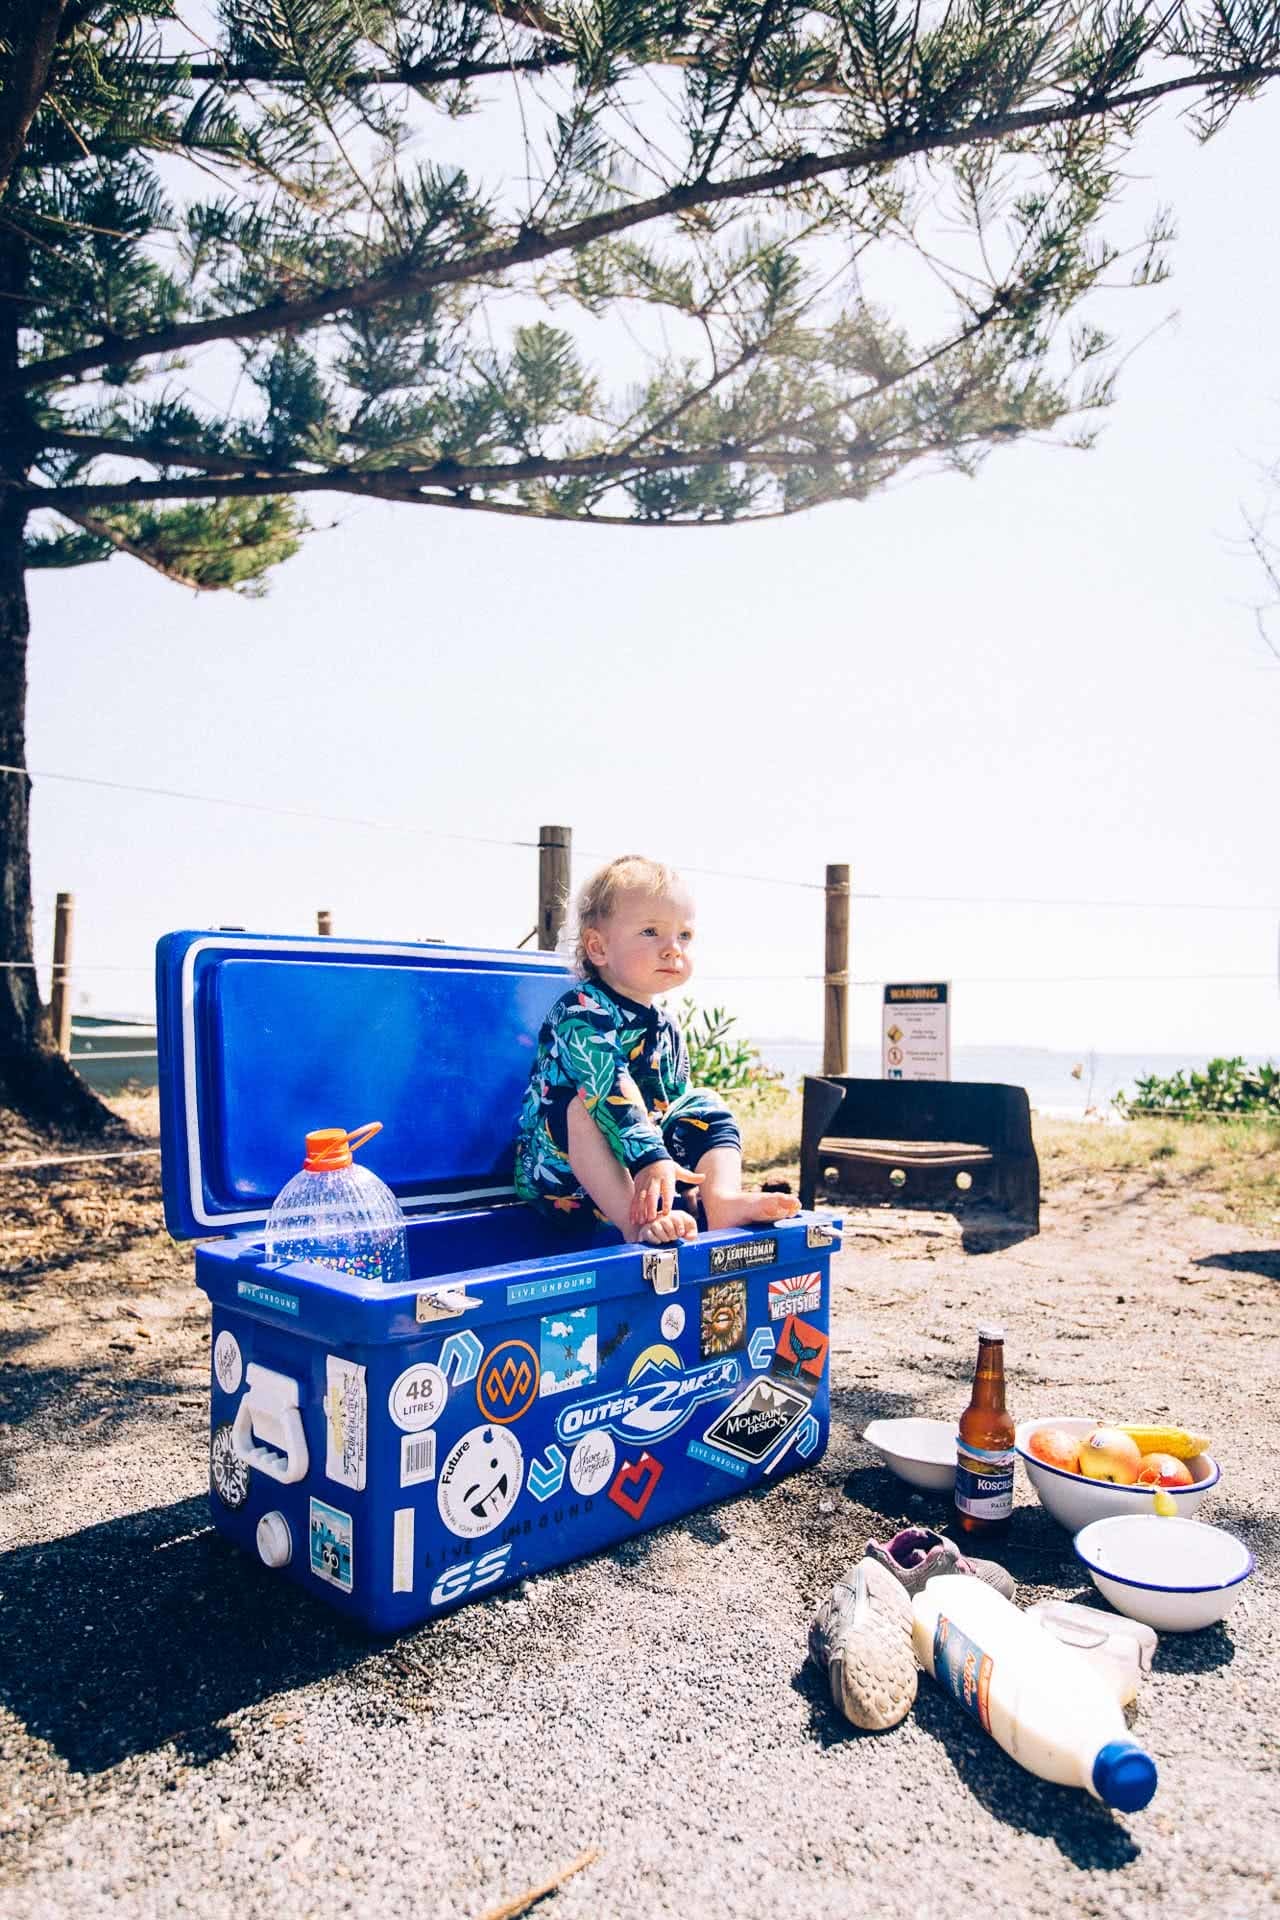 Stay Home Is the Order, but what if You’re a Nomad?, photo by Henry Brydon, sandon river, car camping, nomads, baby, esky, cooler